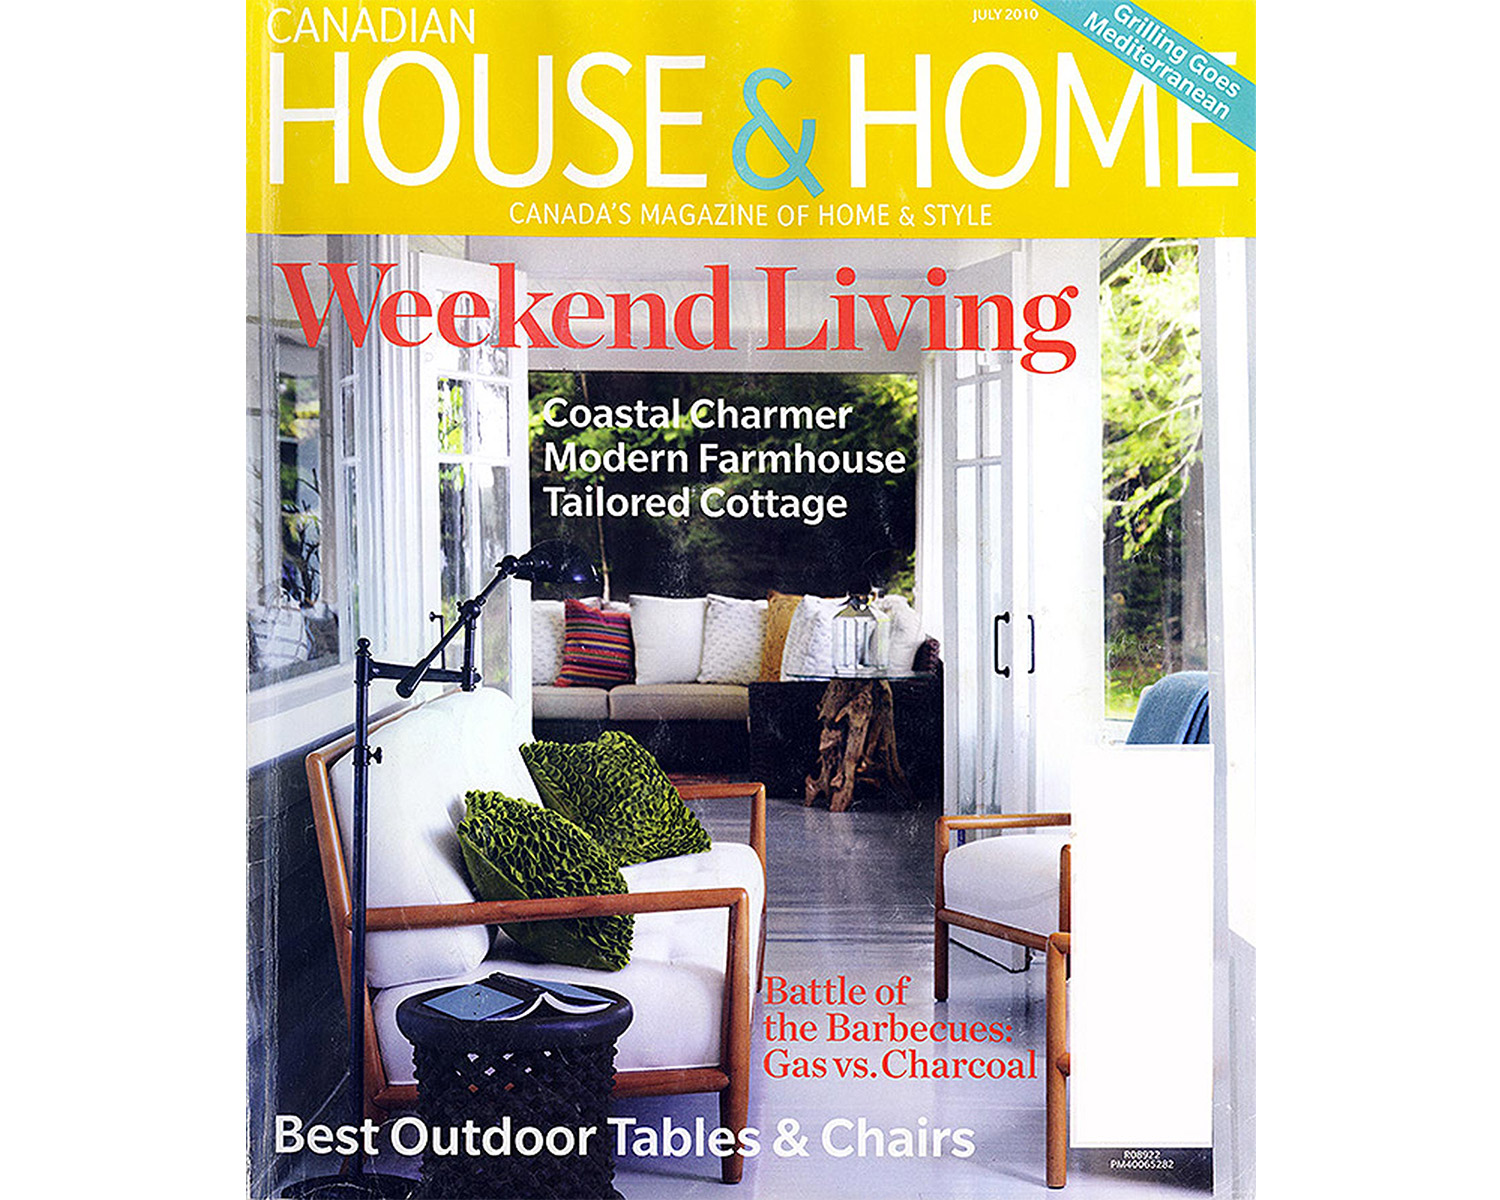 househomejuly2010covernew.jpg